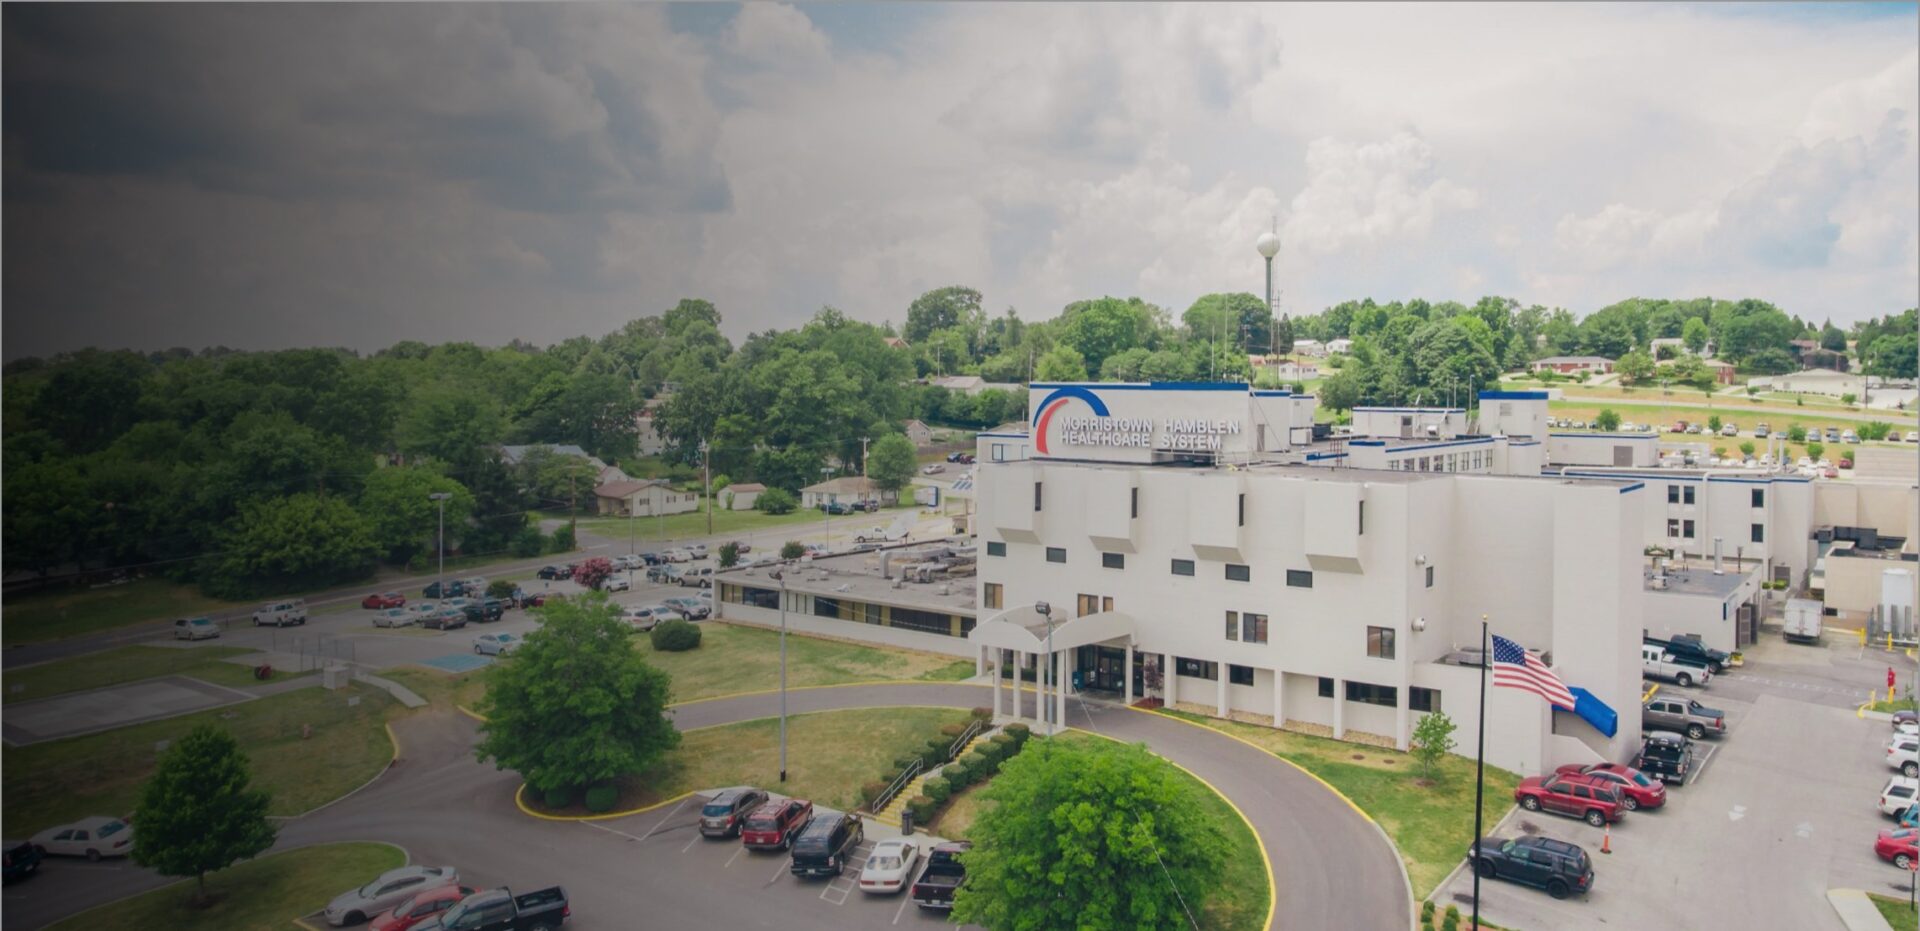 Aerial view of Morristown-Hamblen Healthcare System